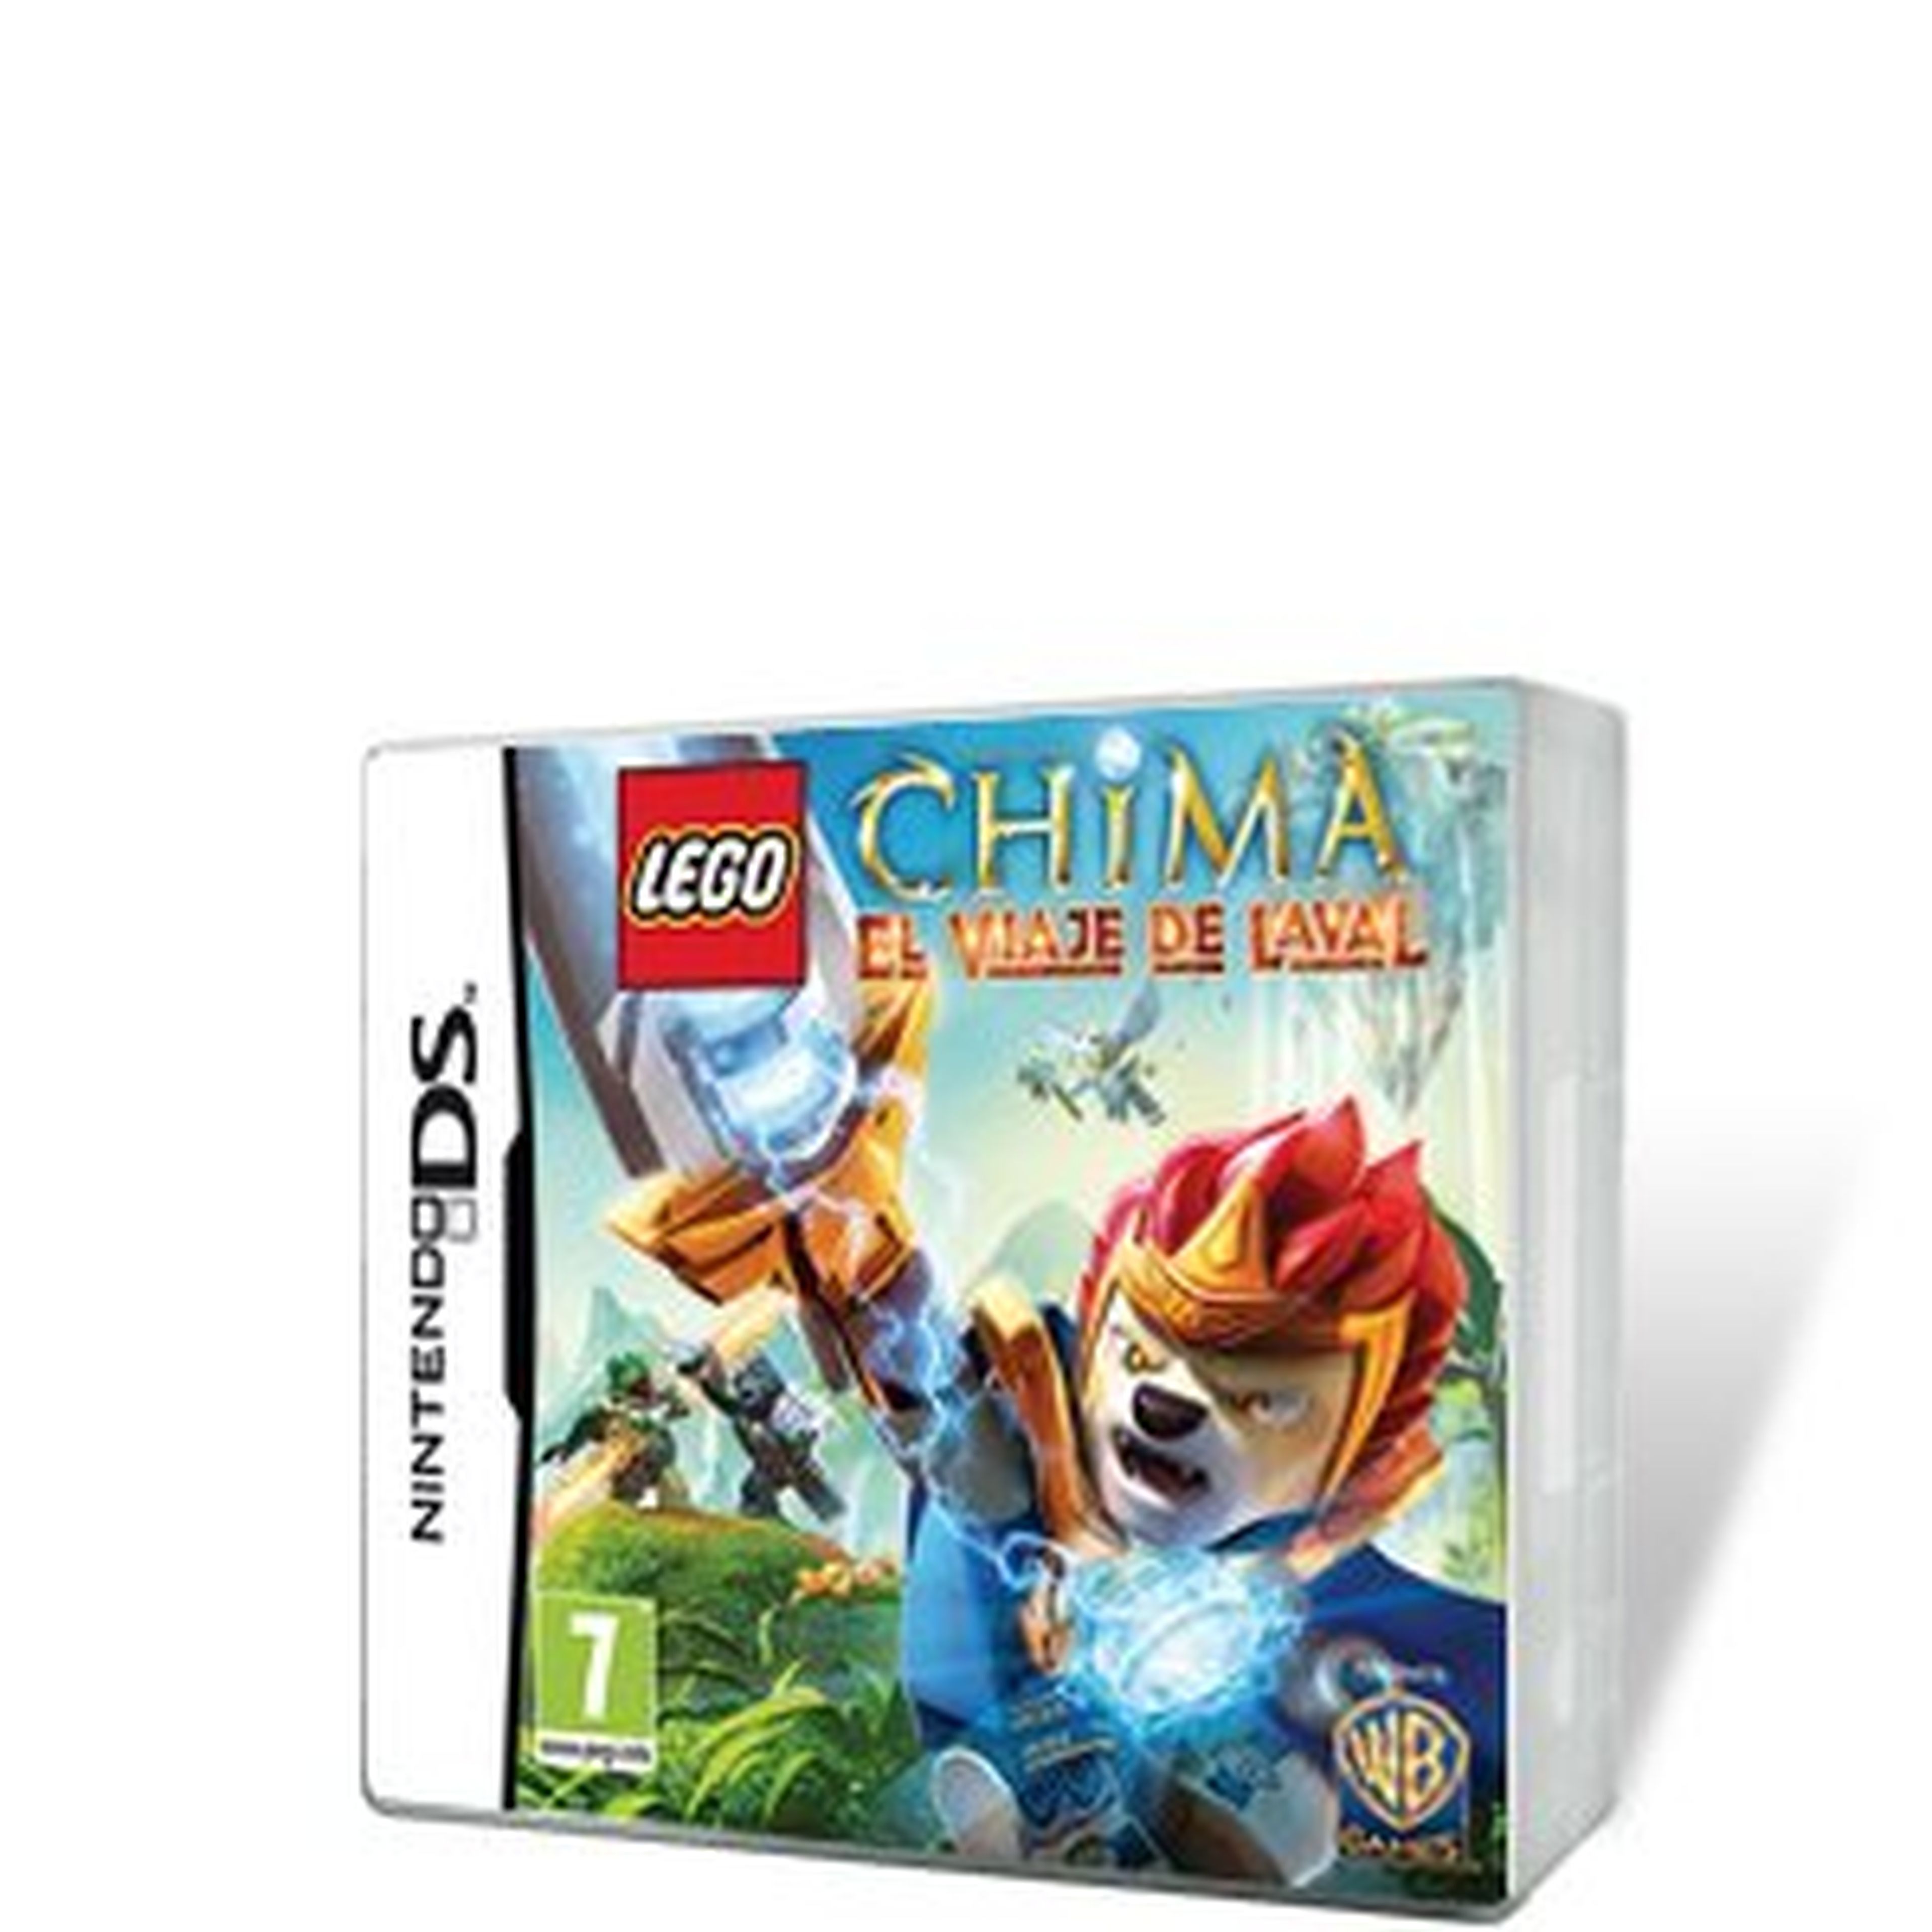 LEGO Legends of Chima Laval's Journey para NDS